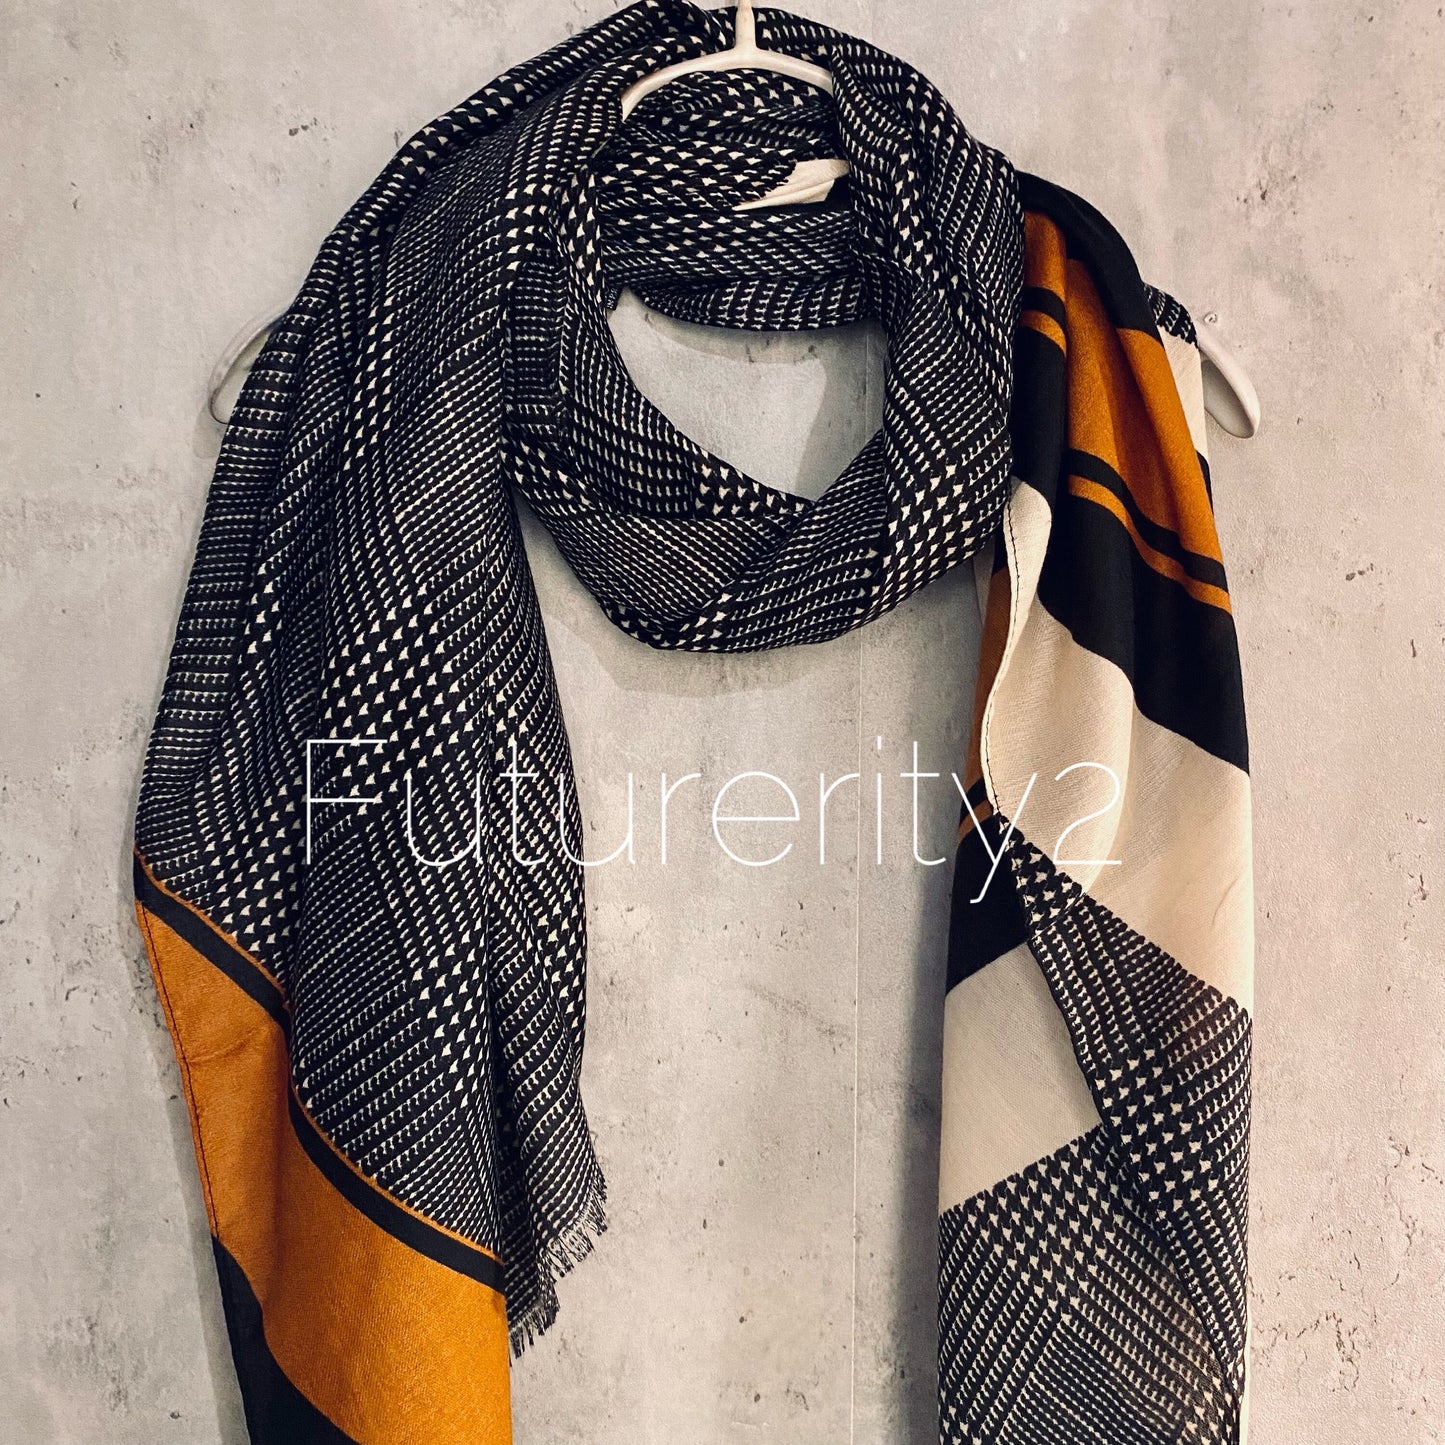 Plaid Pattern With Brown Trim Black Cotton Scarf/Summer Autumn Scarf/Gifts For Mom/Gifts For Her Birthday Christmas/Scarf Women/UK Seller